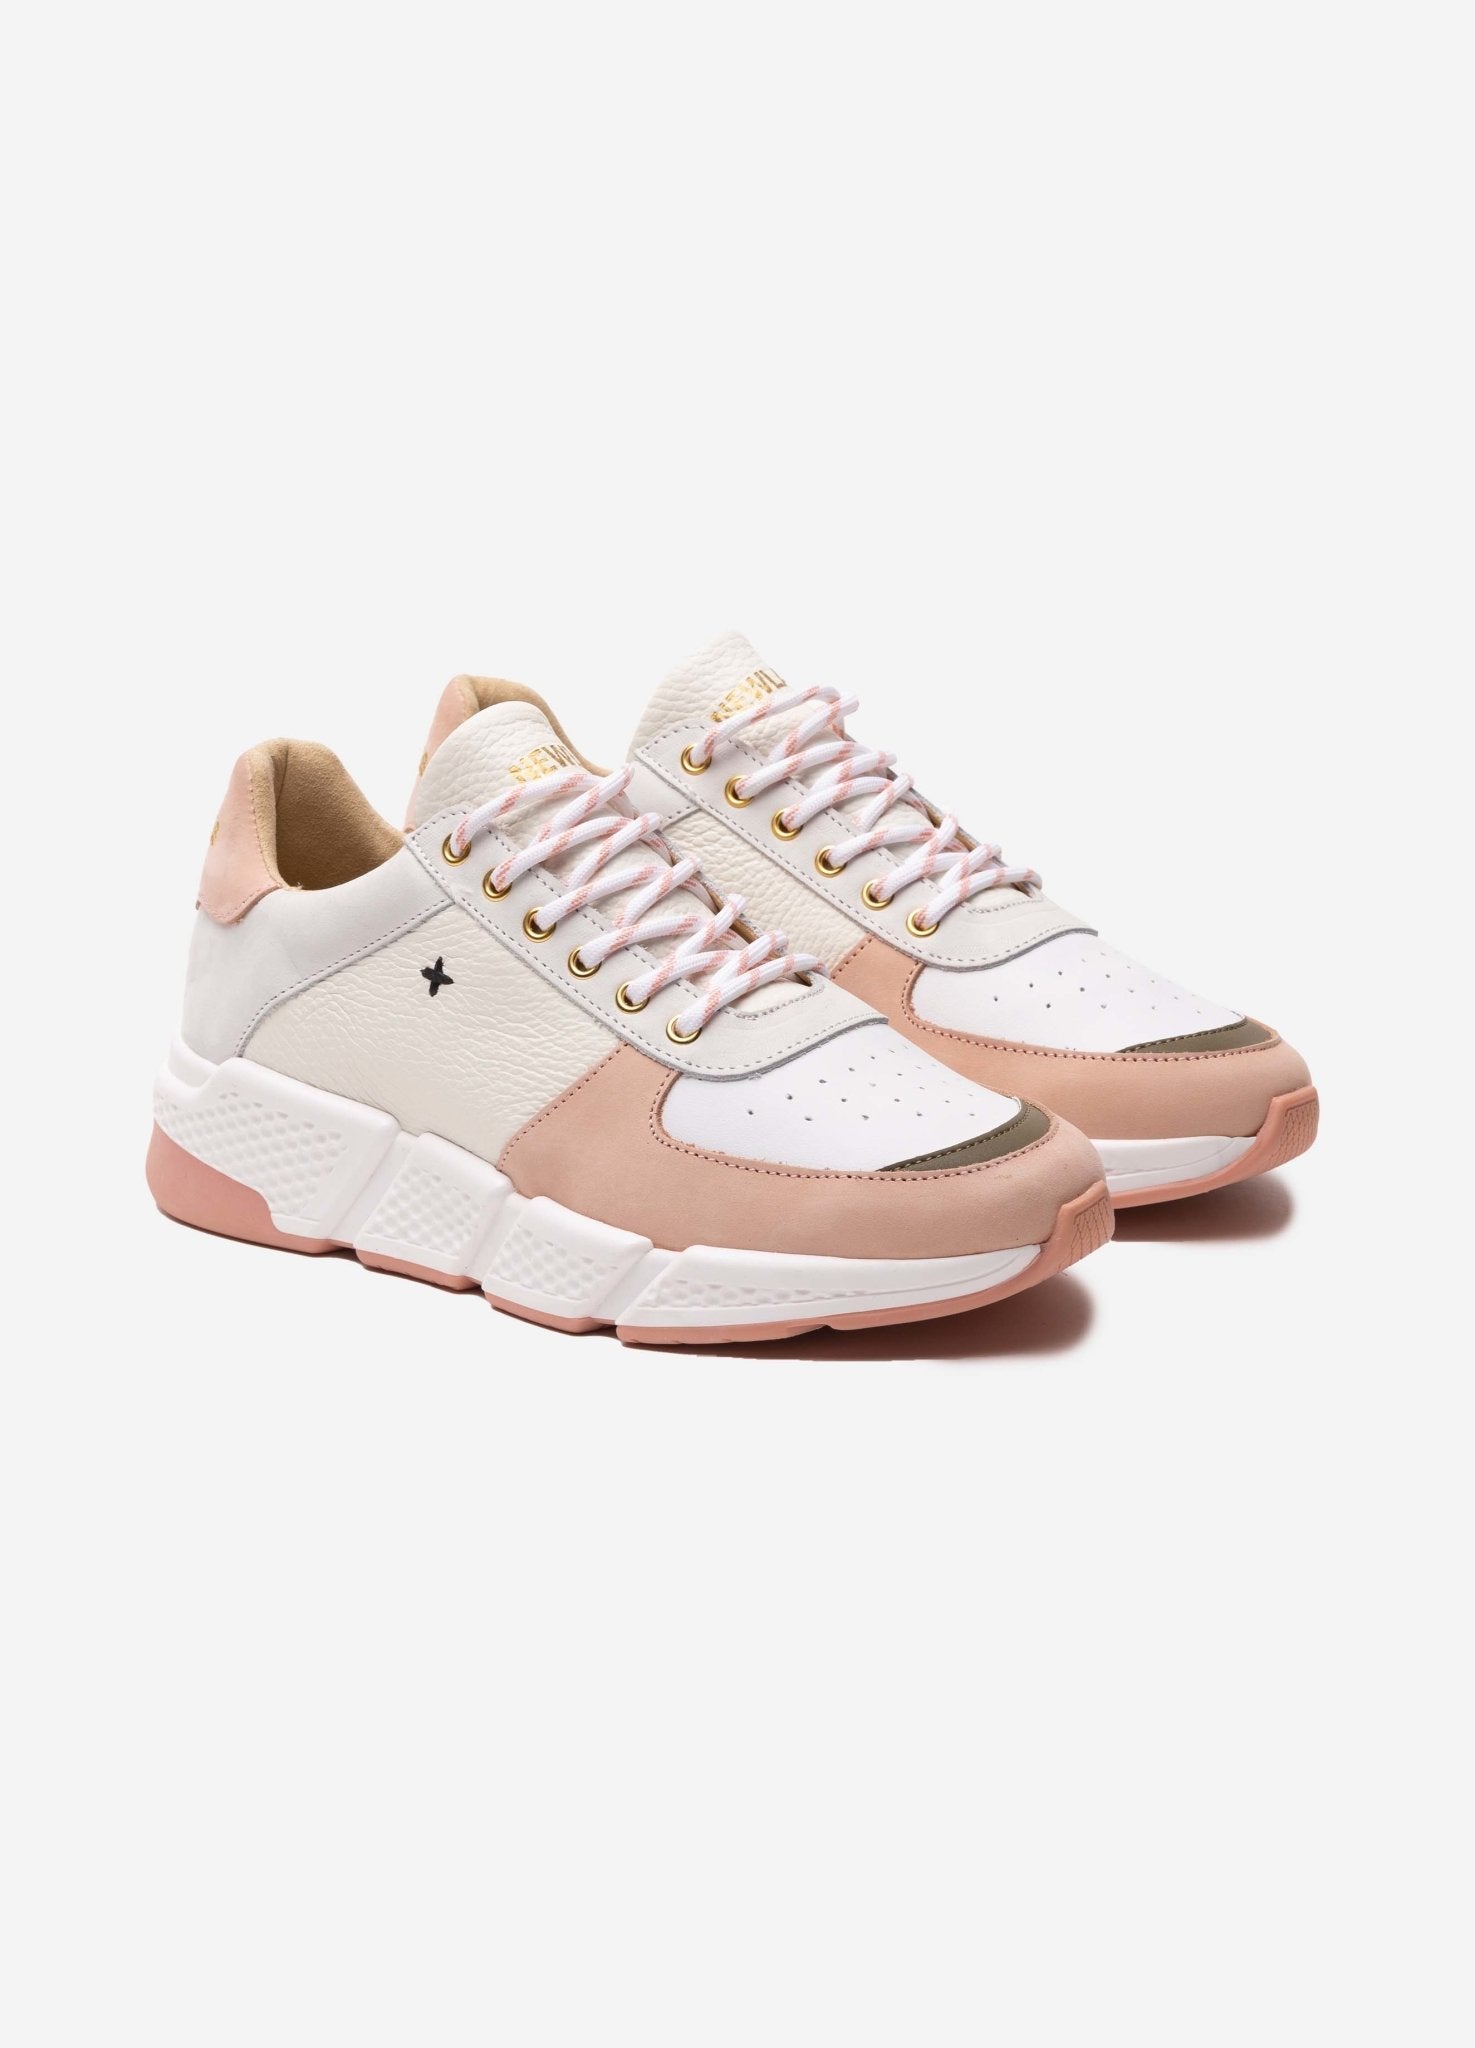 COOPER White/Nude - NEWLAB - Chaussures - NEWLAB